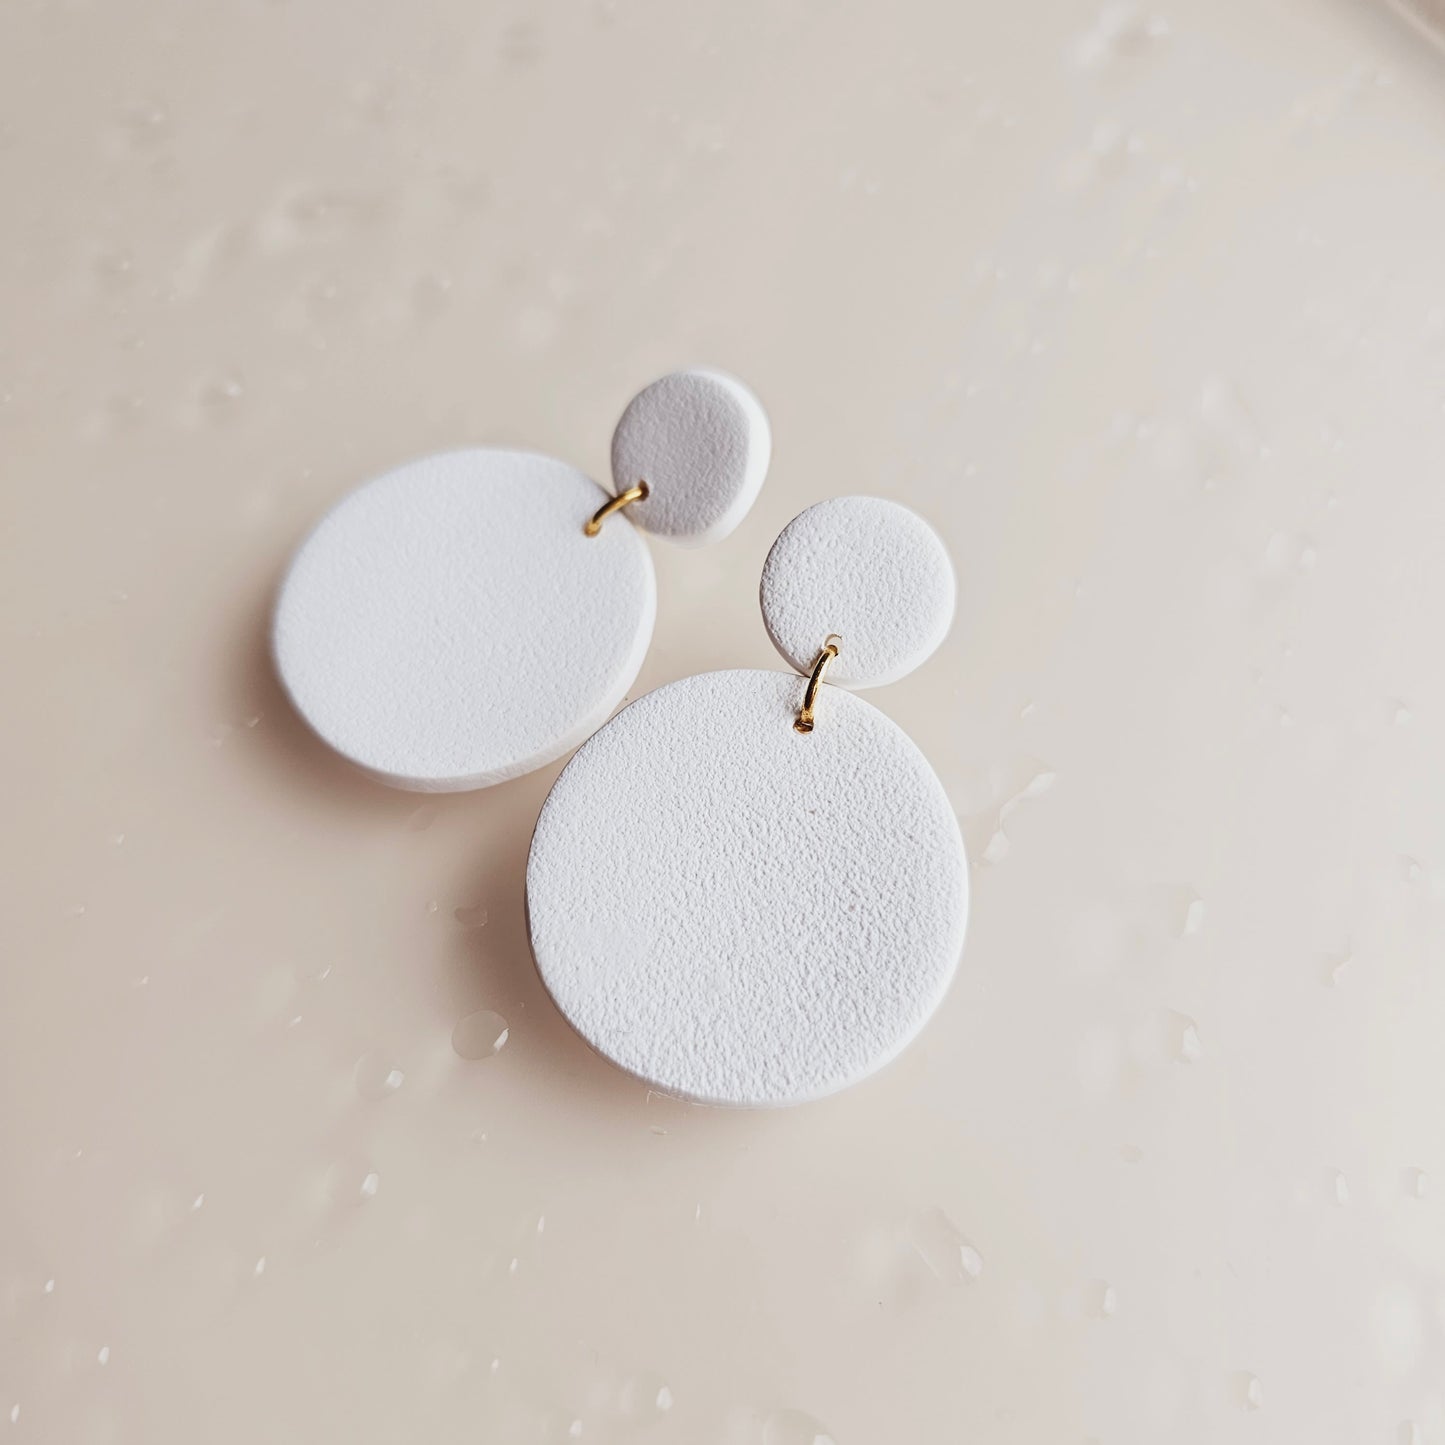 White circle earrings by evelet designs. They have a concrete textured look. 